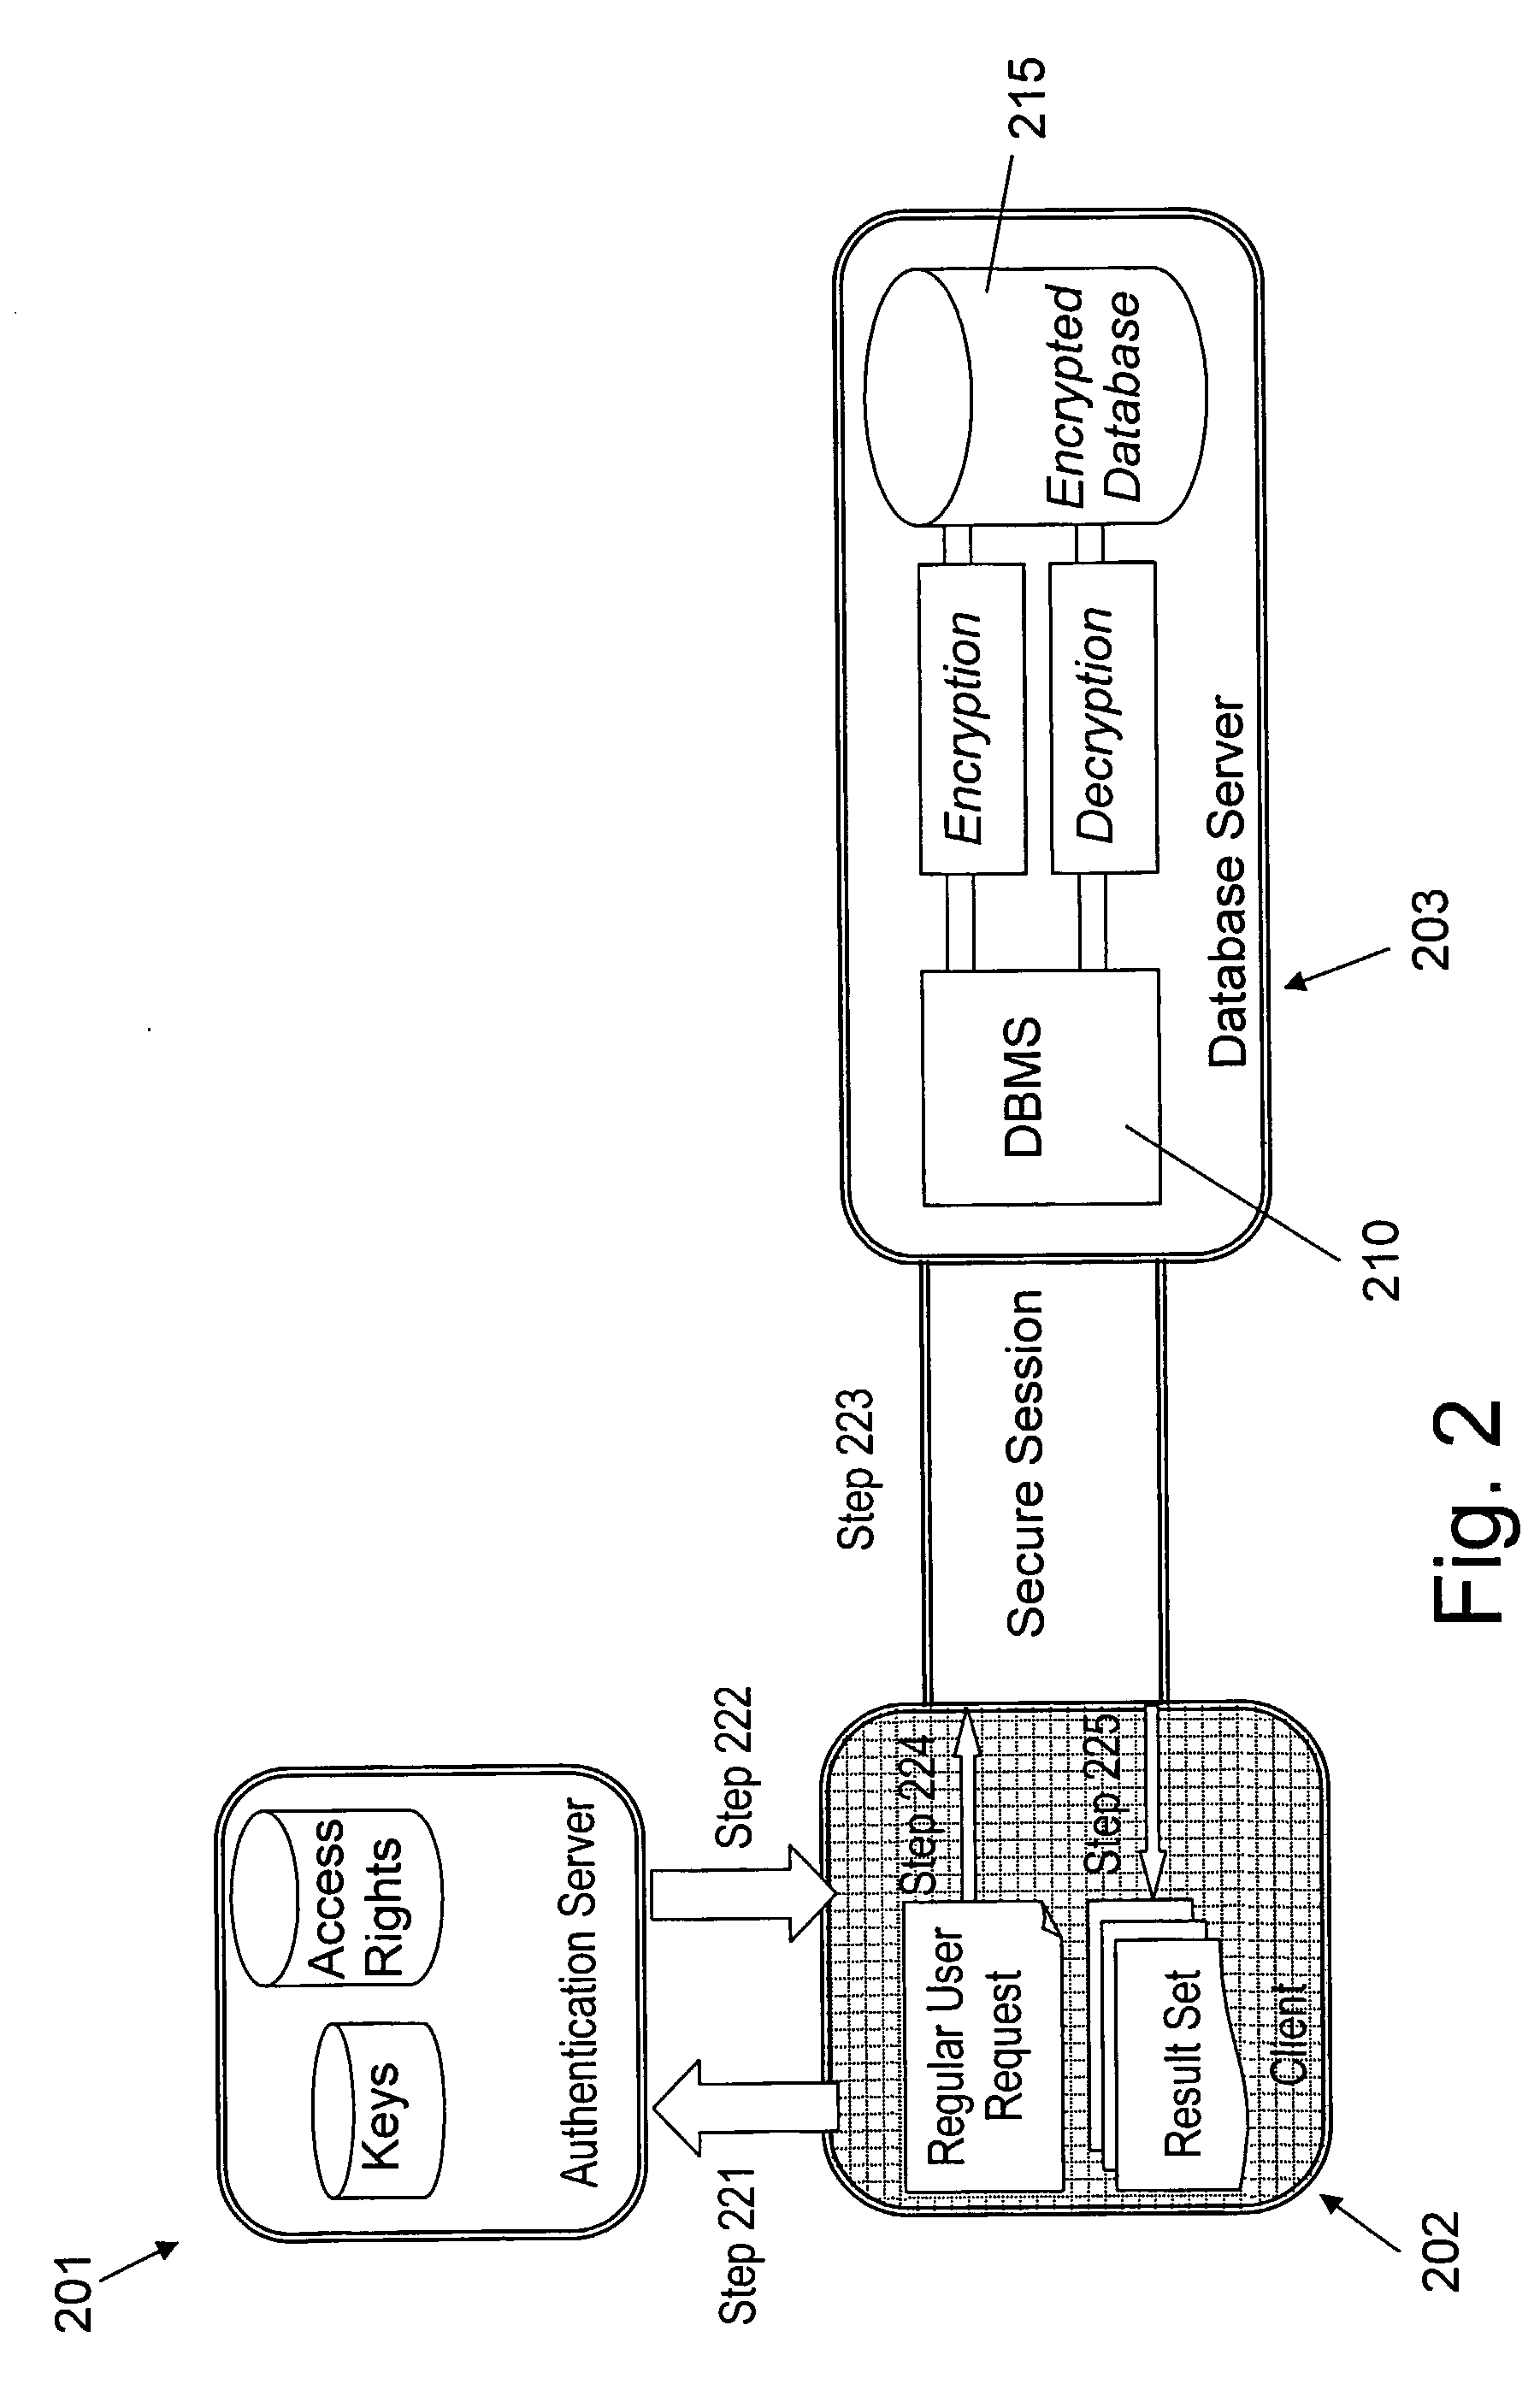 Structure Preserving Database Encryption Method and System